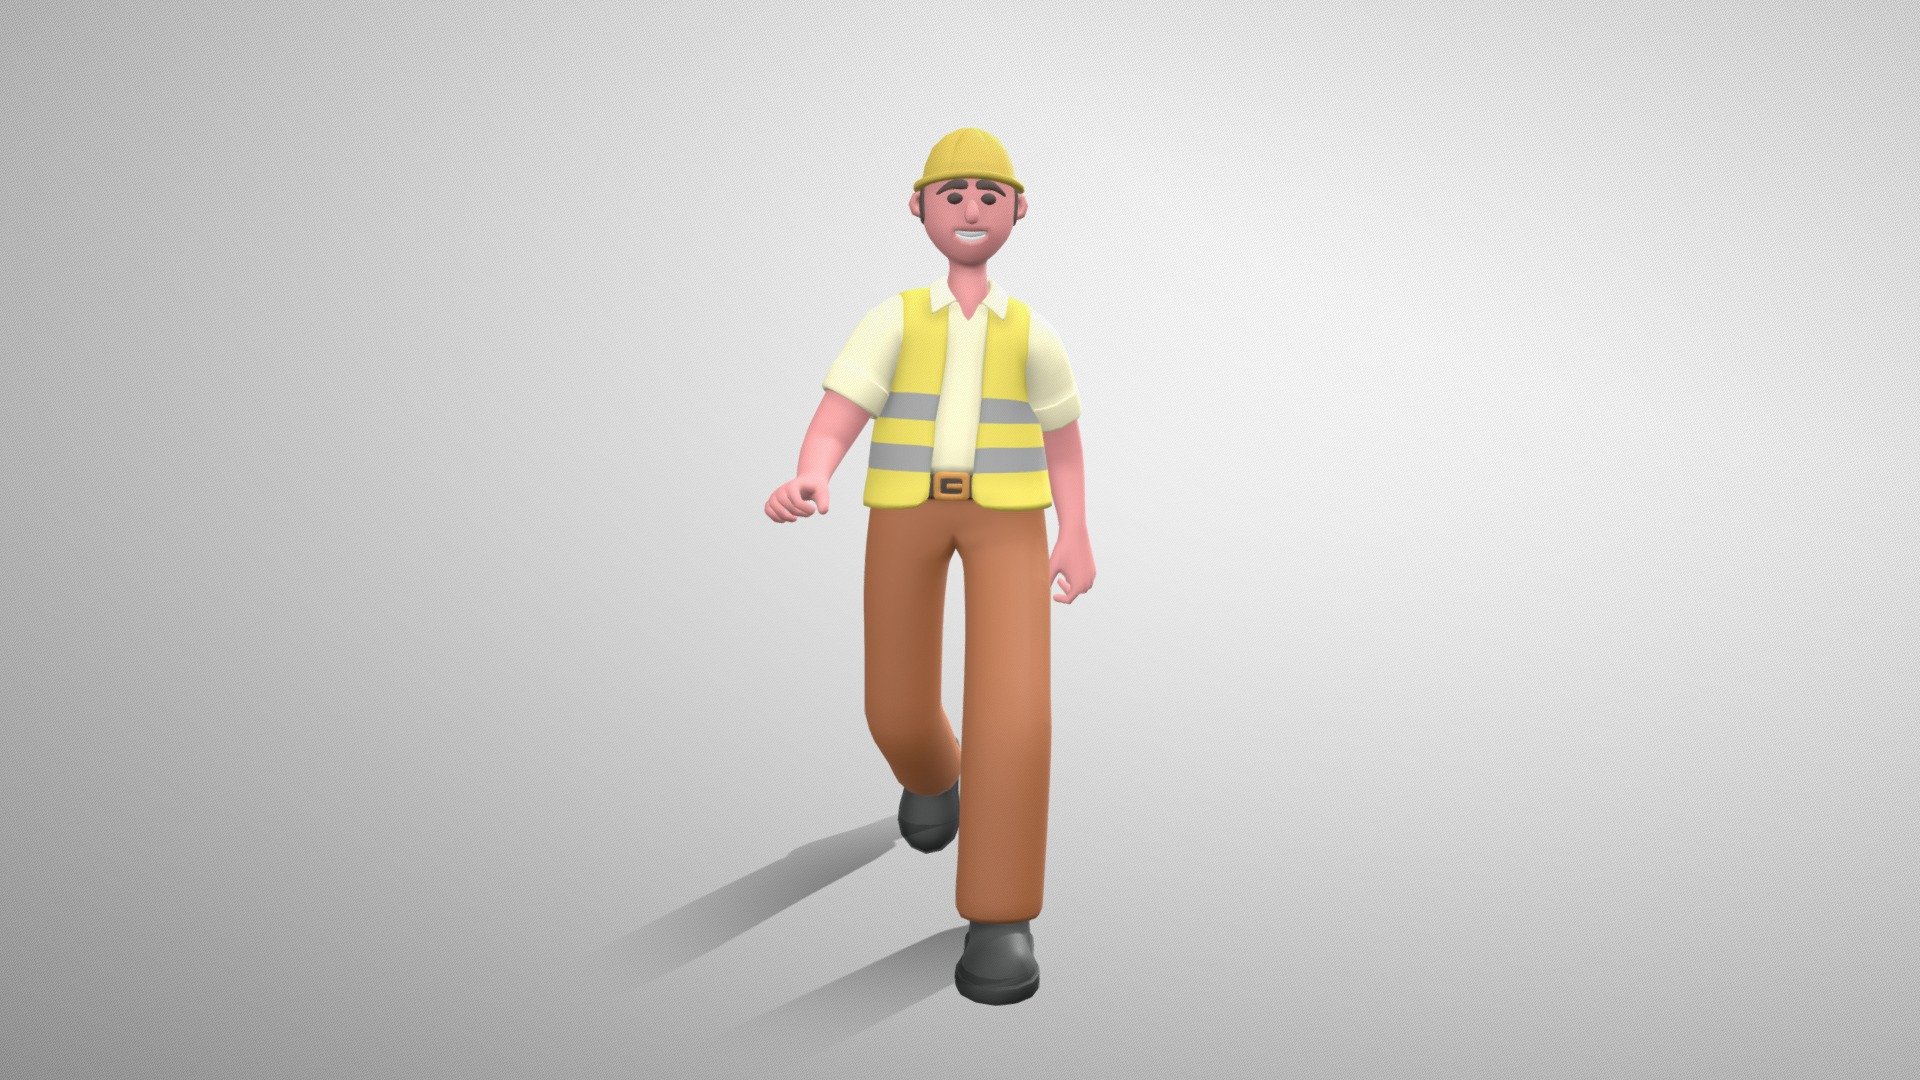 Stylized Man Builder is the part of the big characters bundle. These stylized 3D characters might be useful for motion graphics design, cartoon production, game development, illustrations and many other industries.

The 3D model is rigged and ready to use with Mixamo. You can apply any Mixamo animation in one click . We also added 12 widely used animations.

The character model is well optimized and subdivision ready. You can choose any smoothing option you want, according to your project.

The model has only a single texture. It is useful for mobile game development and it's easy to change colors of clothes, skin etc.

If you have any questions or suggestions on improving our product, feel free to send a message to mail@dreamlab.net.ua - Stylized Man Builder - Mixamo Rigged Character - Buy Royalty Free 3D model by Dream Lab (@dreamlabanim) 3d model